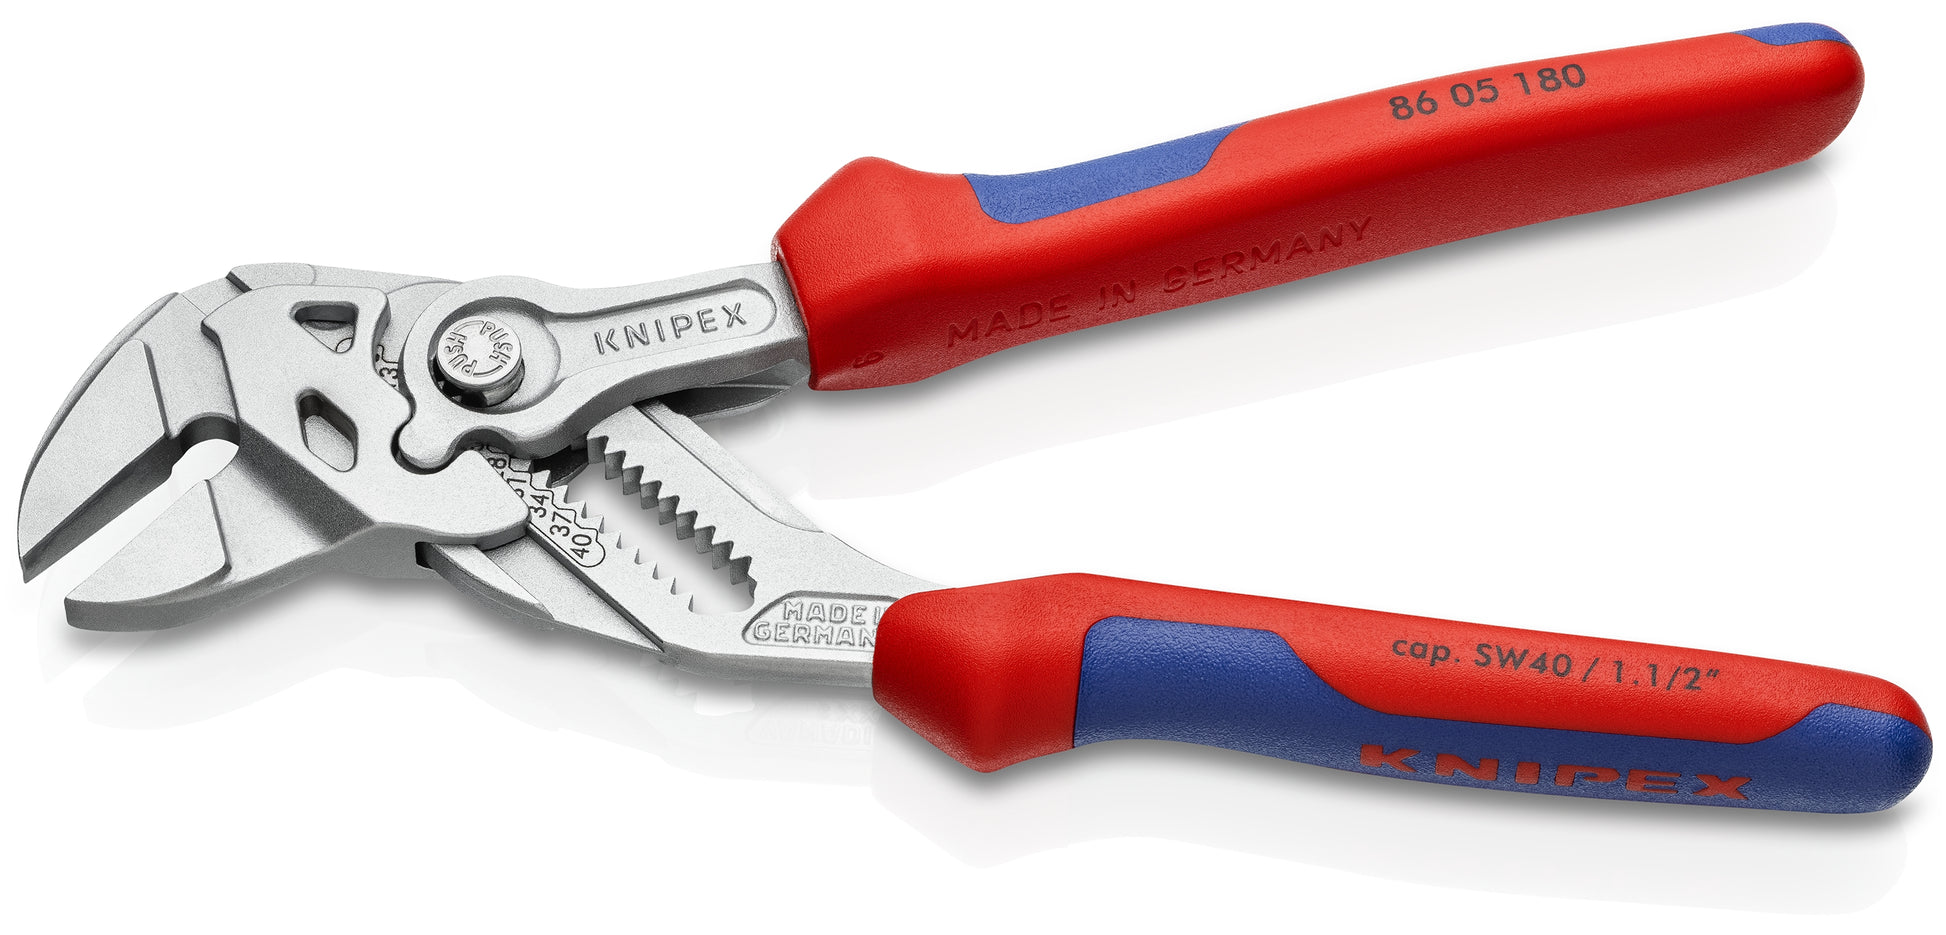 Knipex 86 05 180 Pliers Wrench